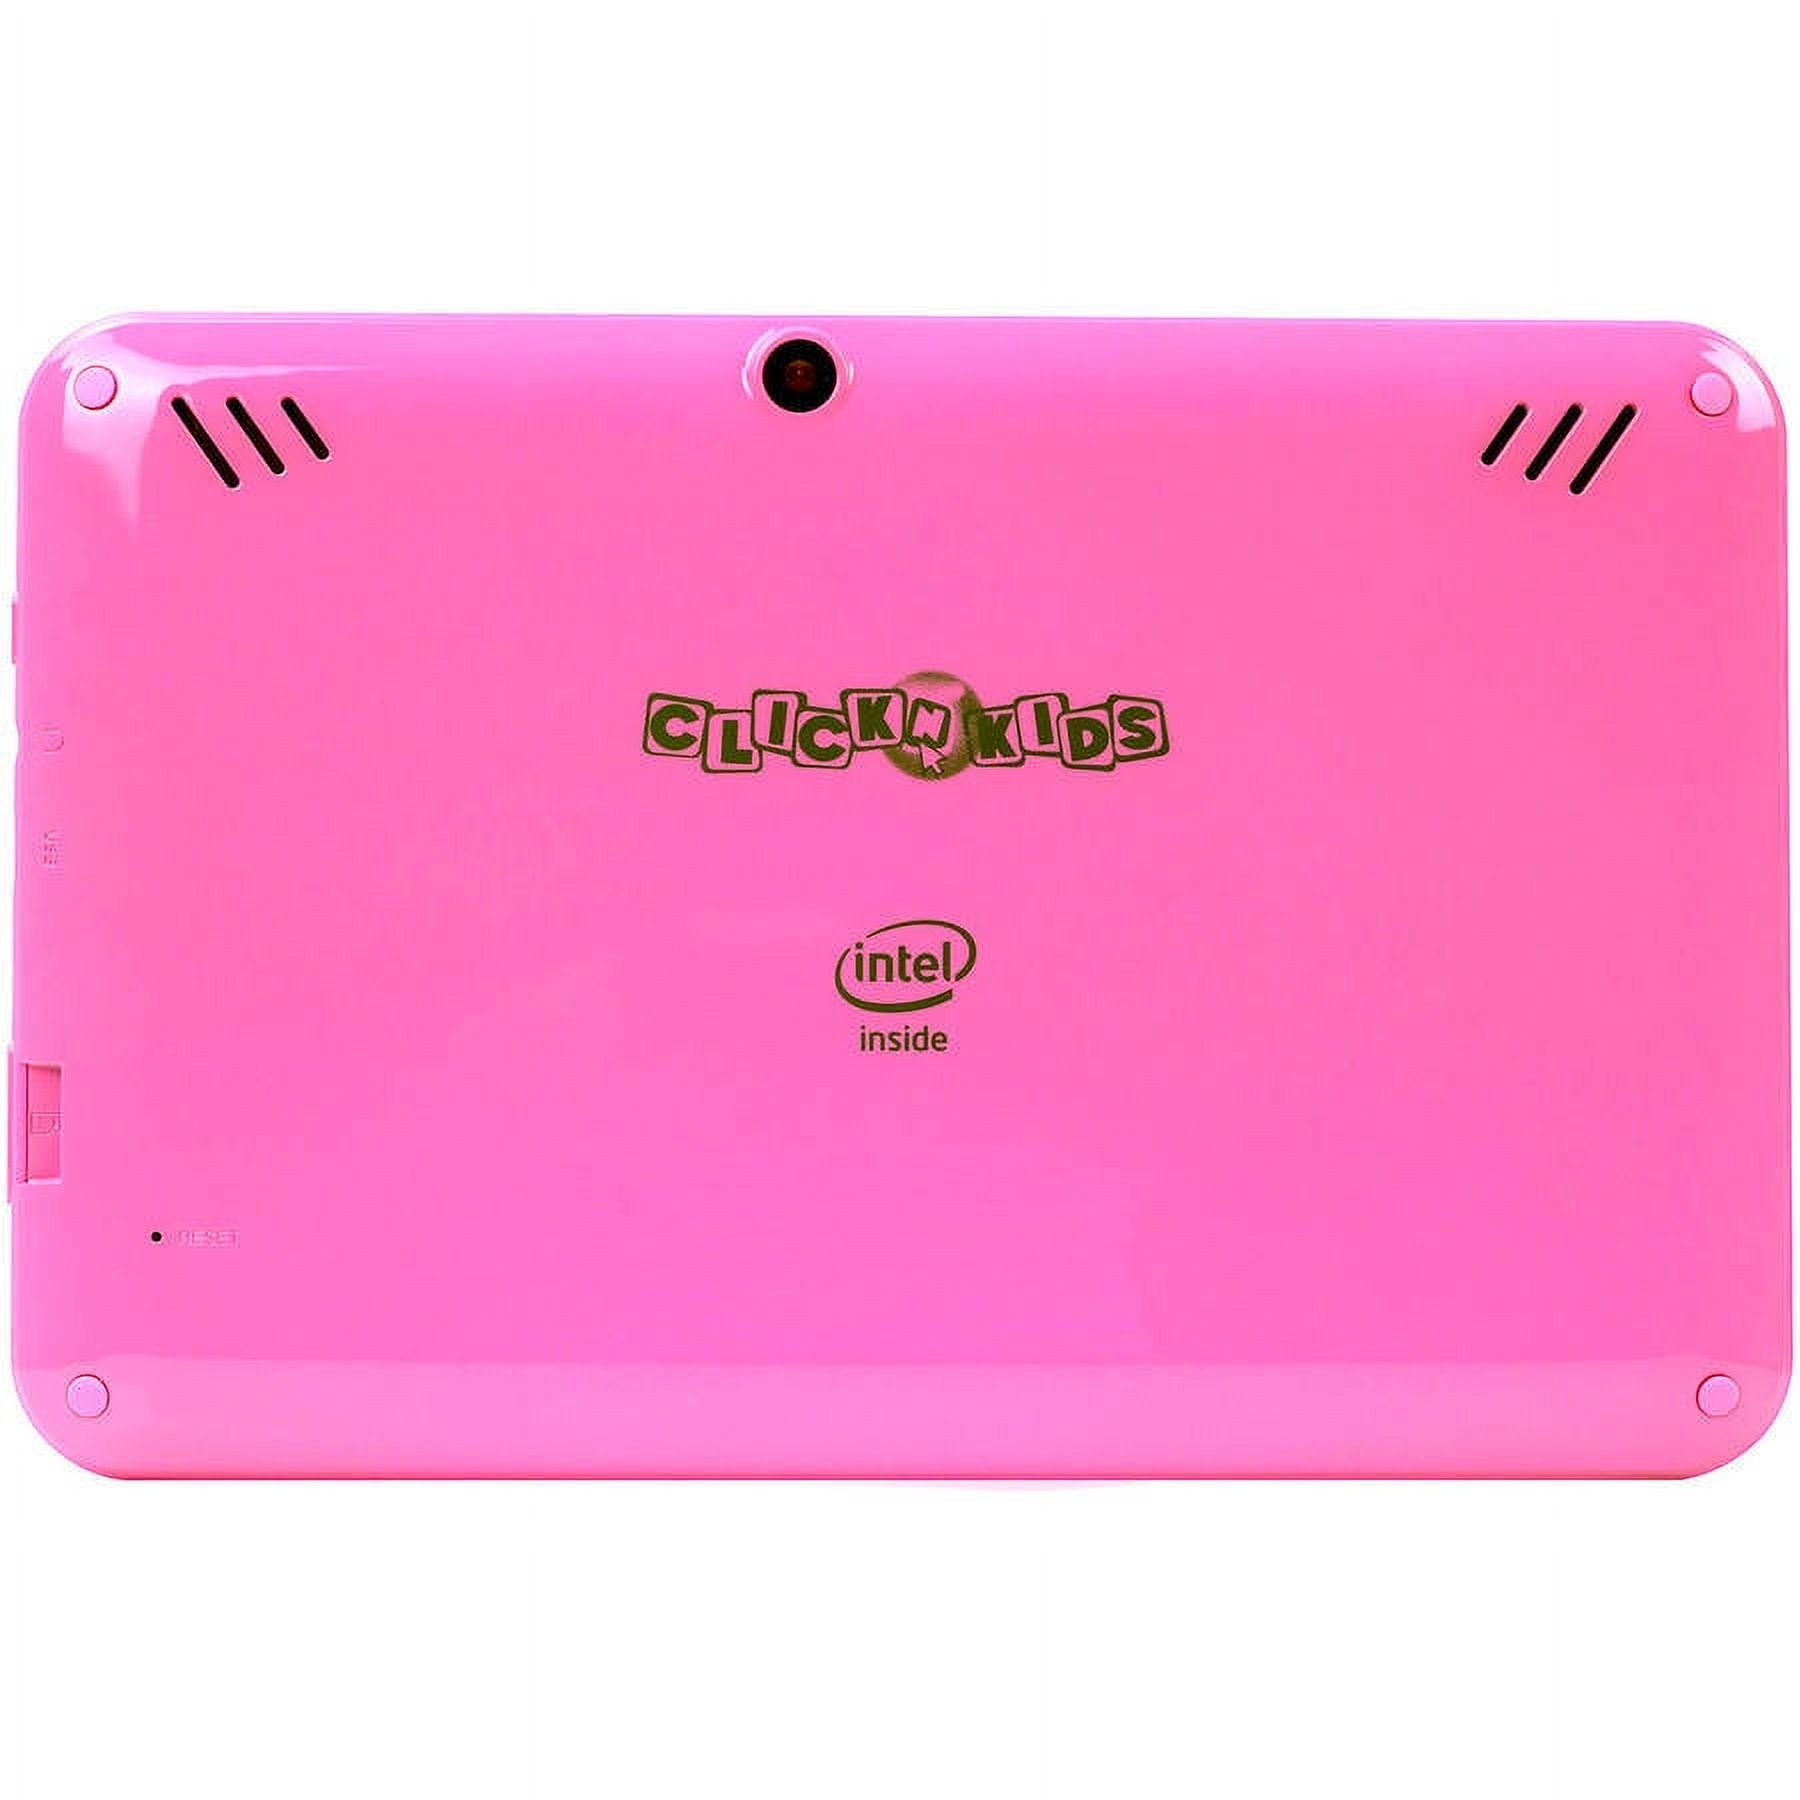 HighQ Learning Tab 7" Kids Tablet 16GB Intel Atom Processor Preloaded with Learning Apps & Games Pink - image 4 of 5